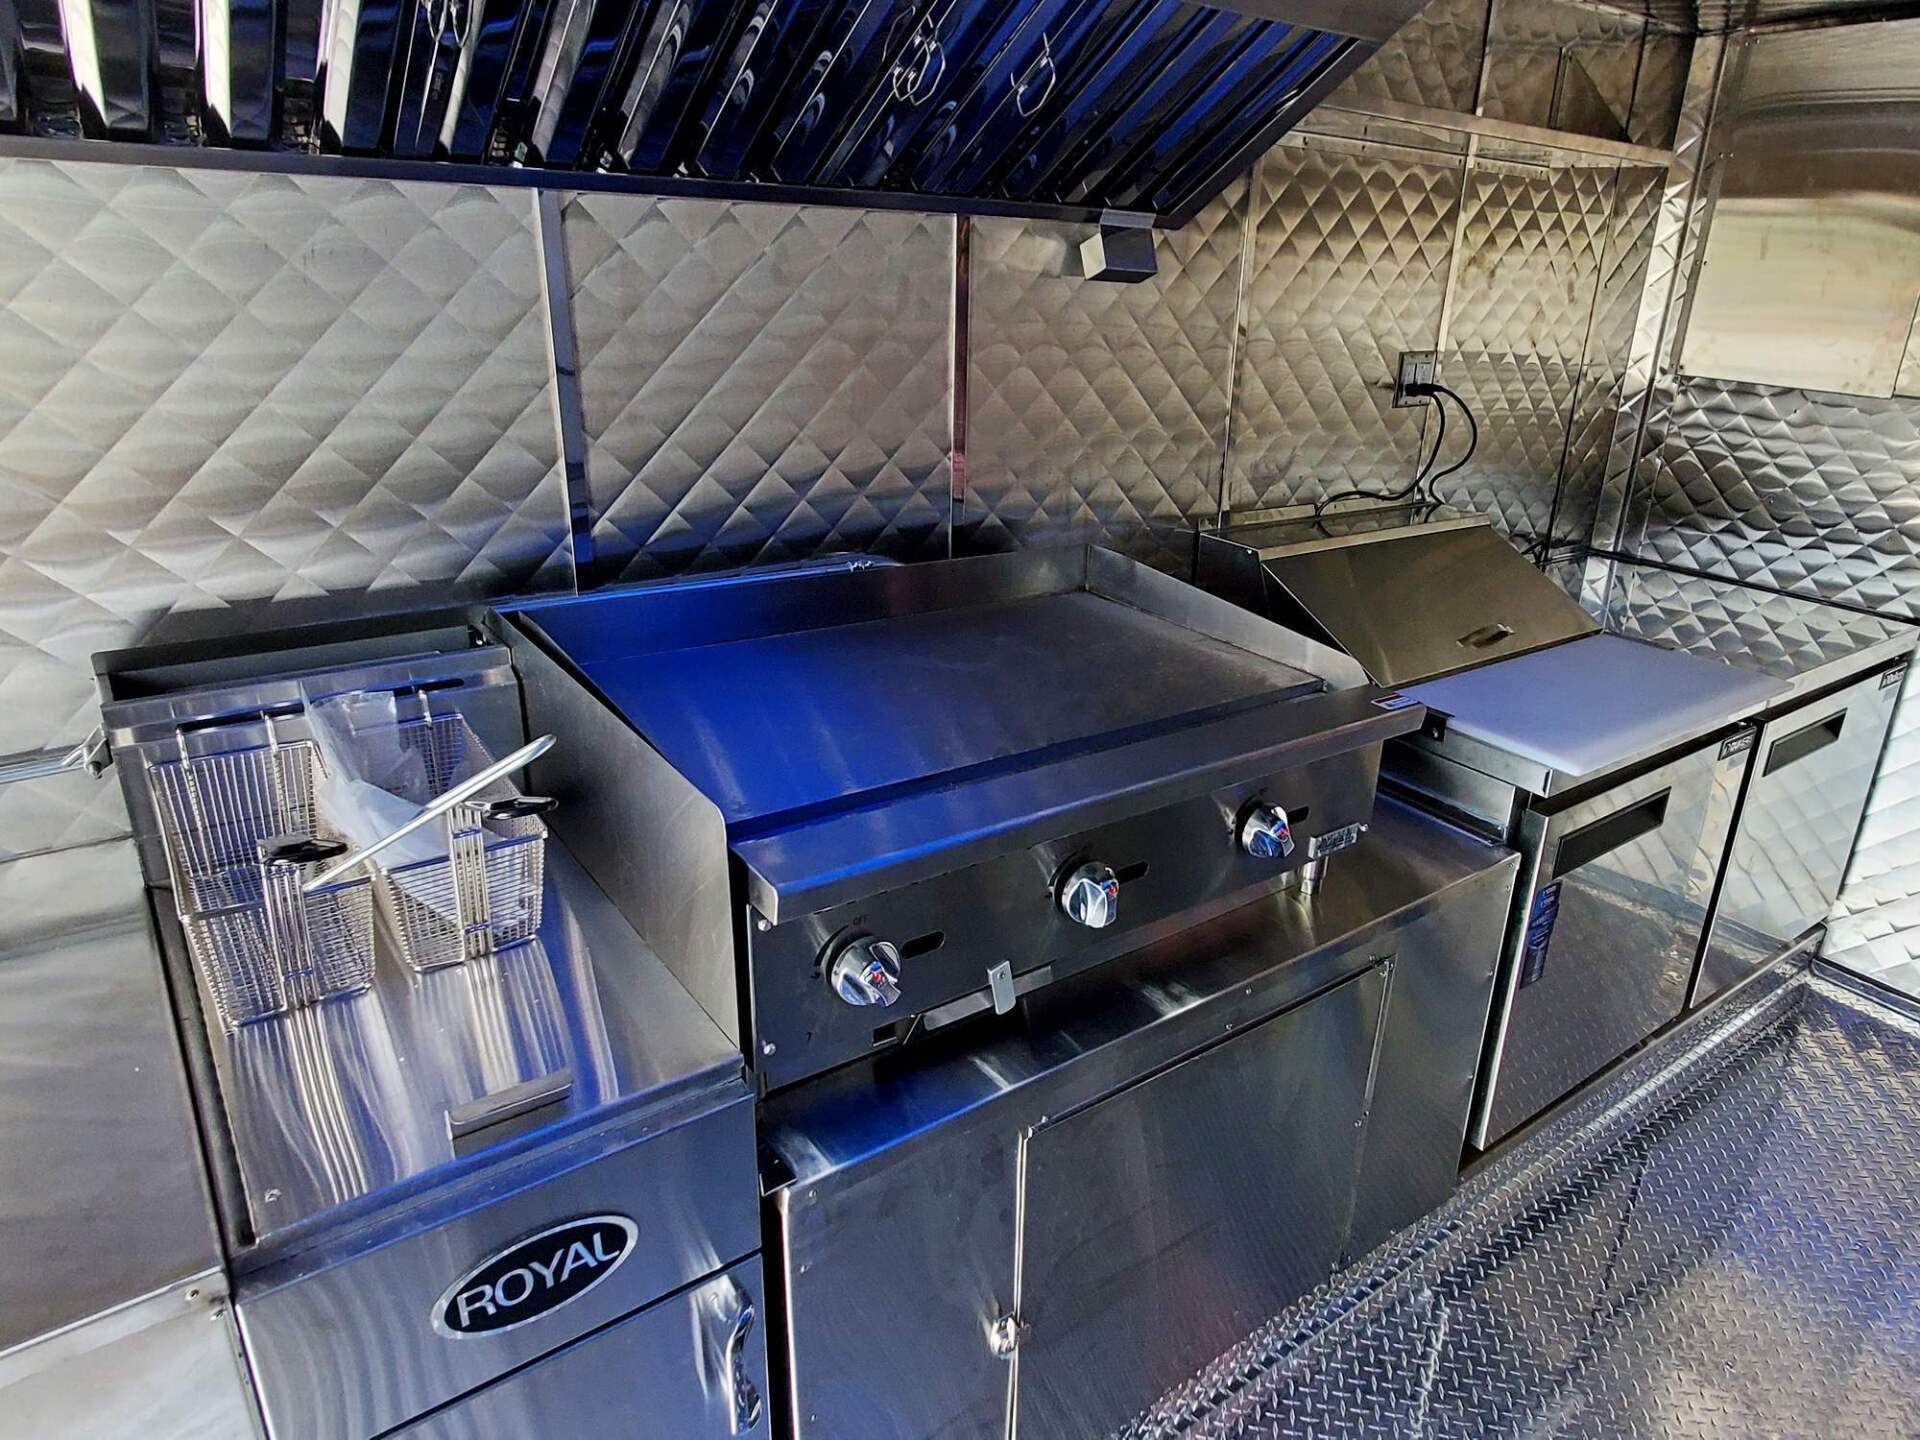 Stainless steel flat top grill inside a compact food truck kitchen